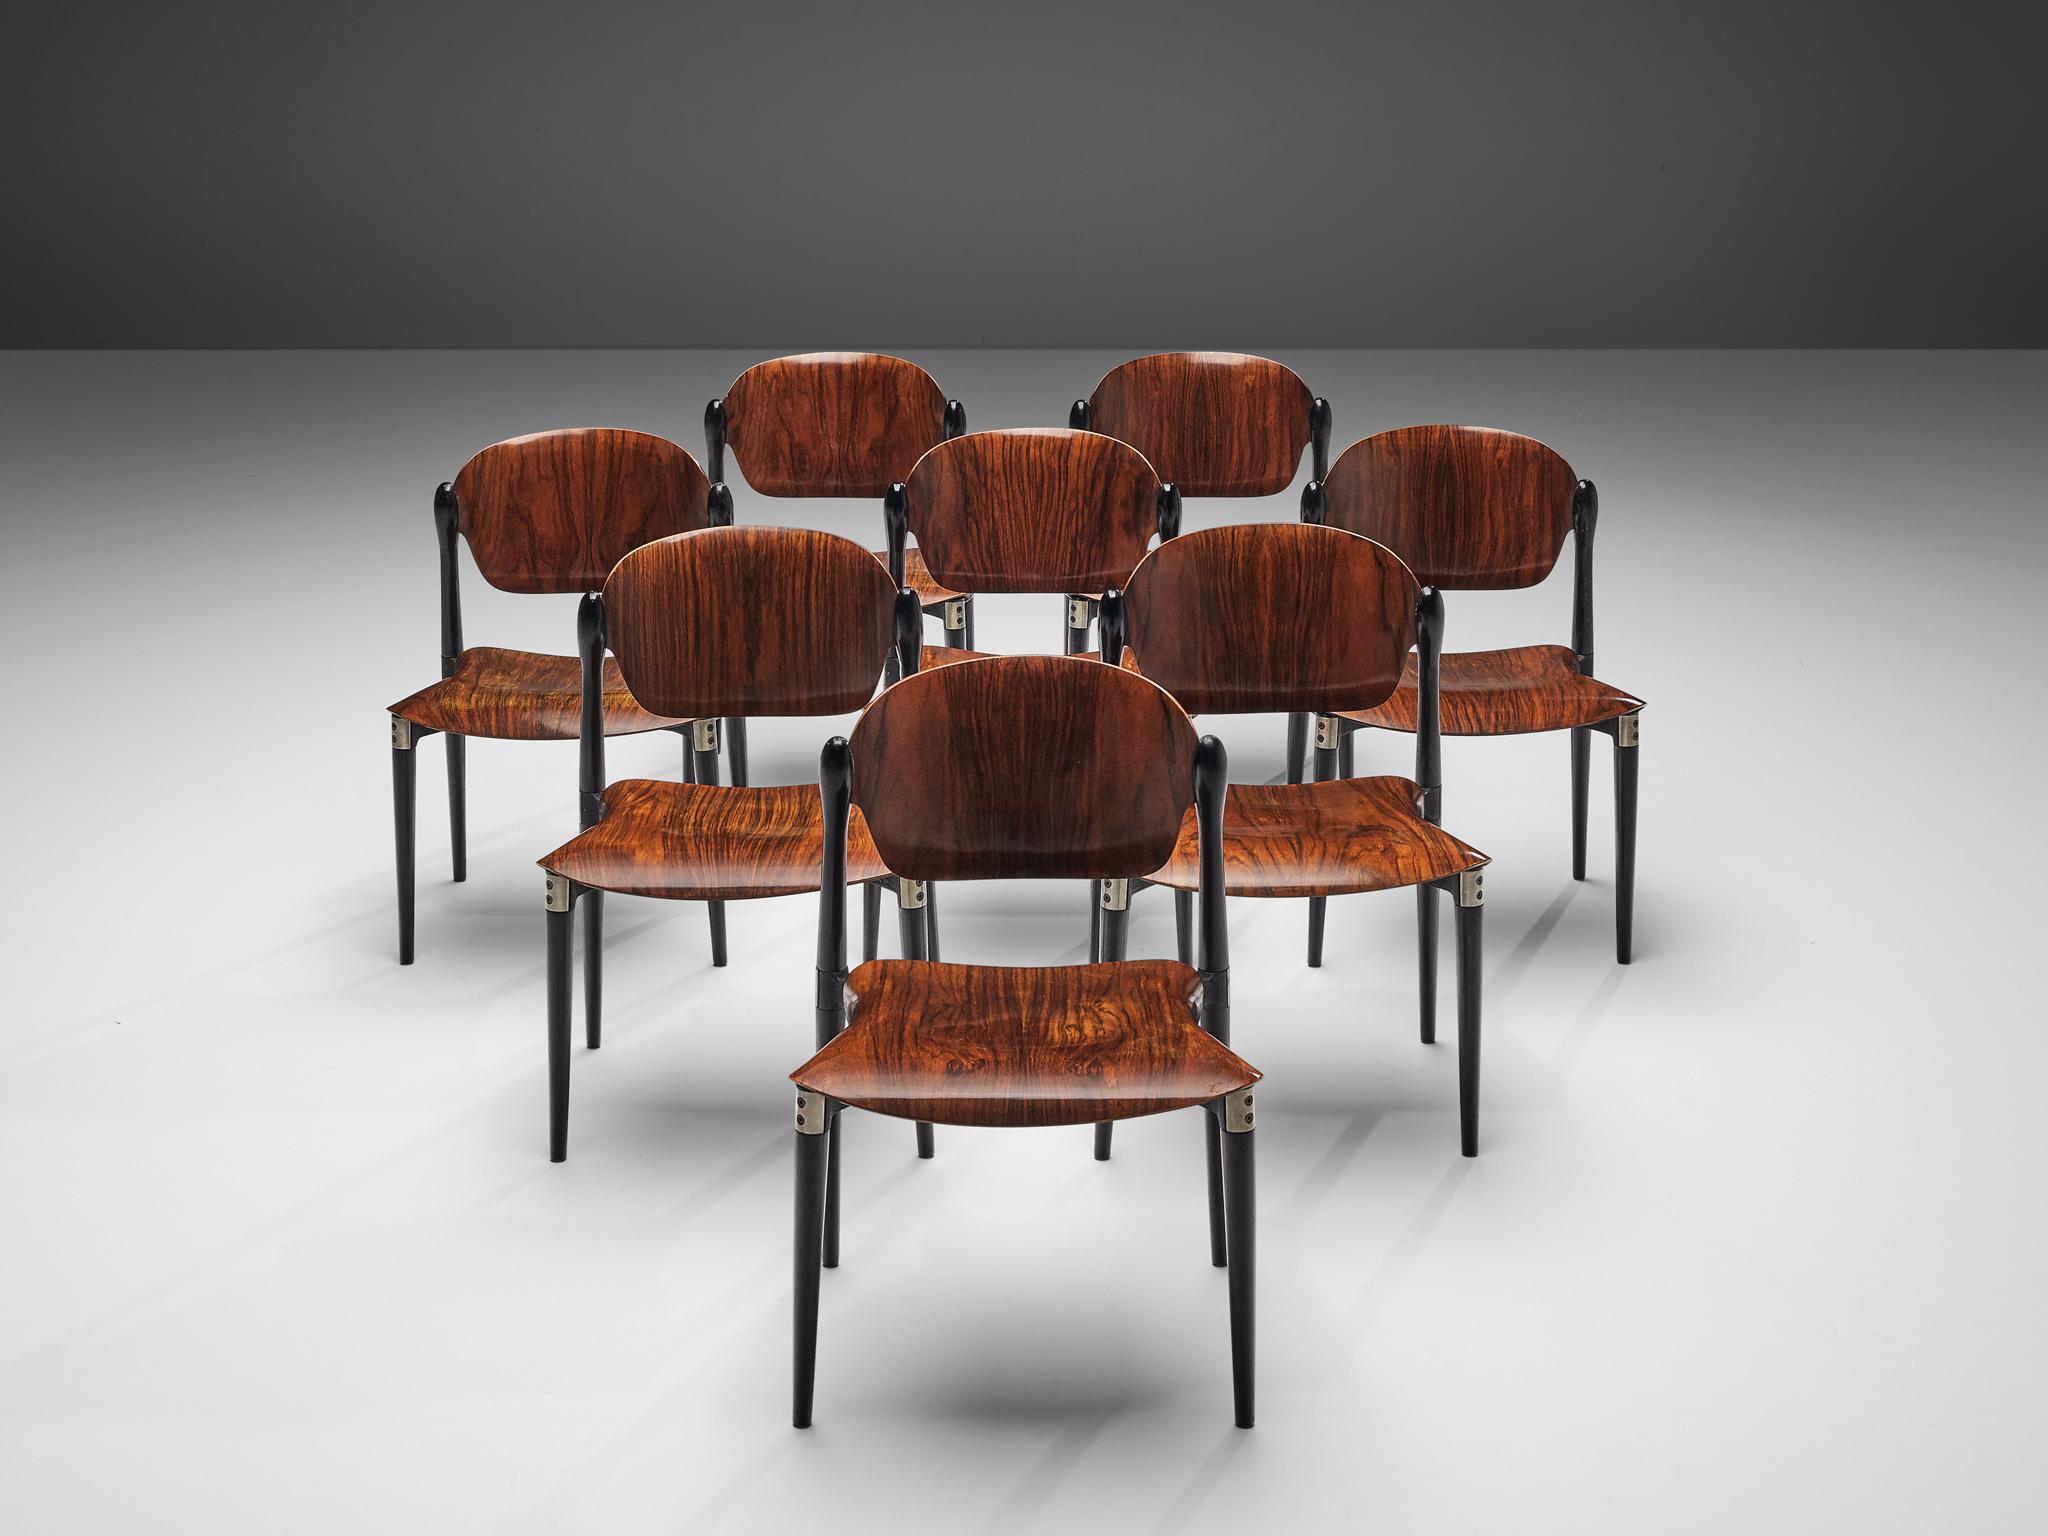 Eugenio Gerli for Tecno, set of eight dining chairs, rosewood, black lacquered wood, aluminum, Italy, 1962

Set of eight dining chairs by Italian manufacturer Tecno. The dynamically bent plywood seats and backs of these dining chairs are highlighted